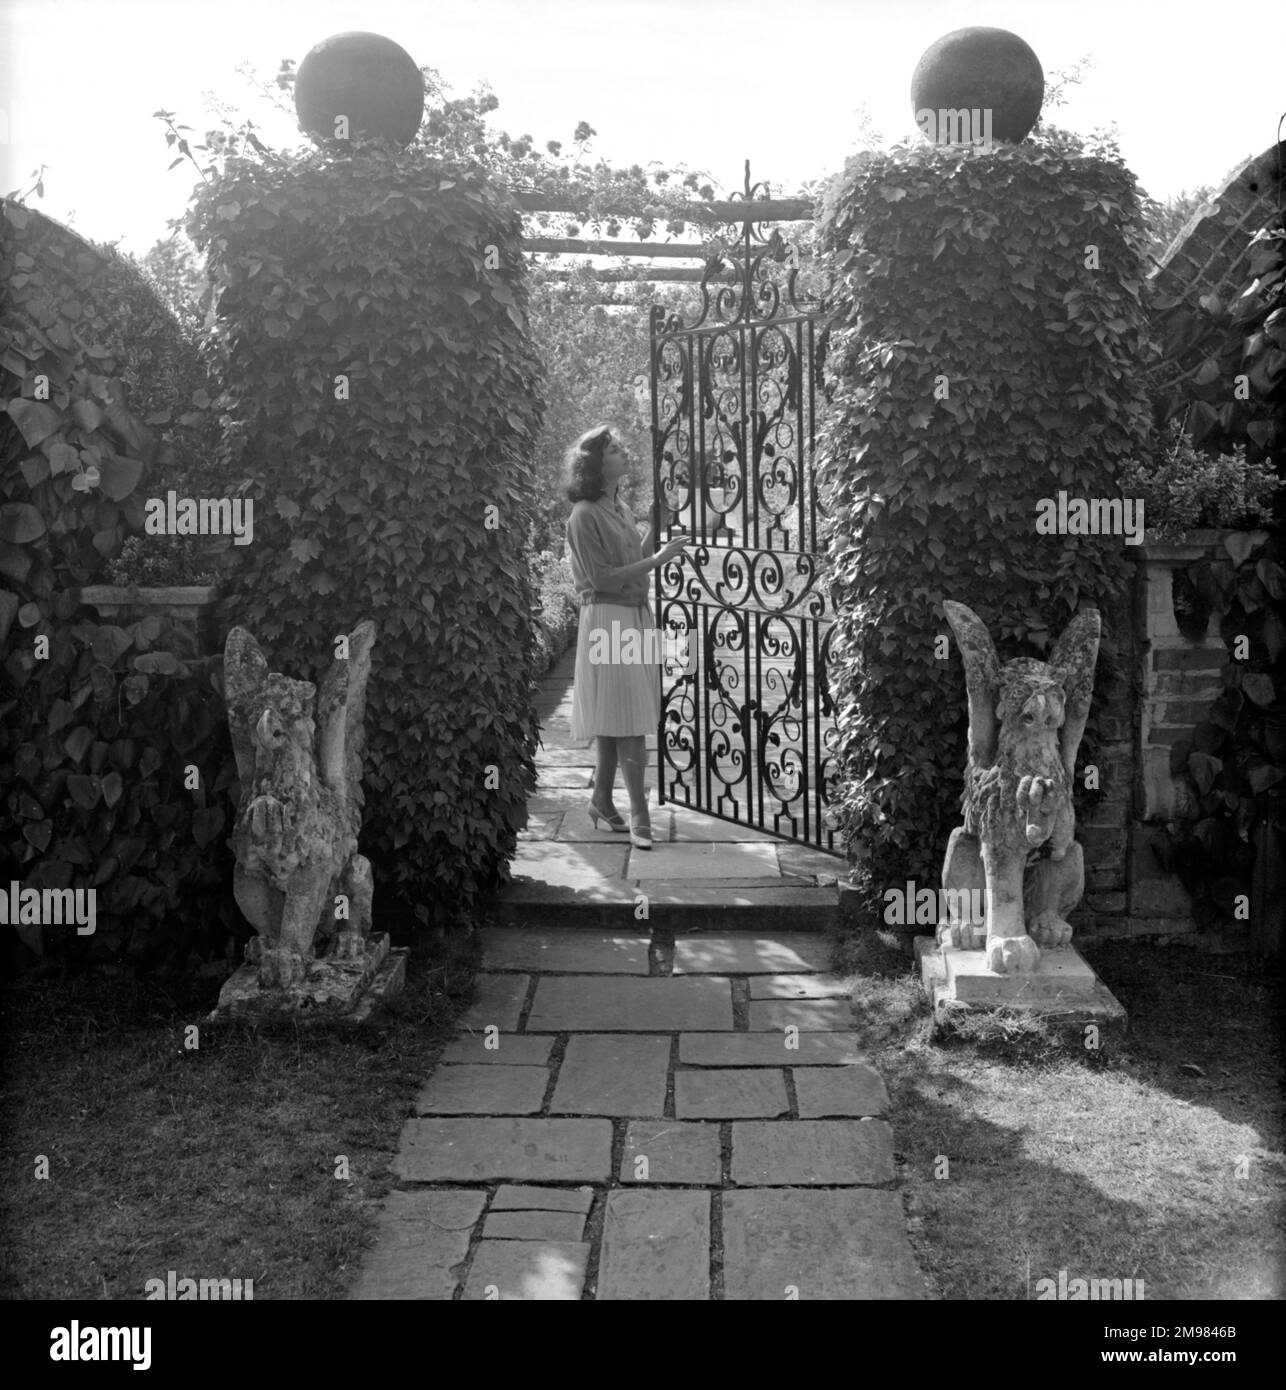 Wrought iron gate in a garden with female model. Stock Photo